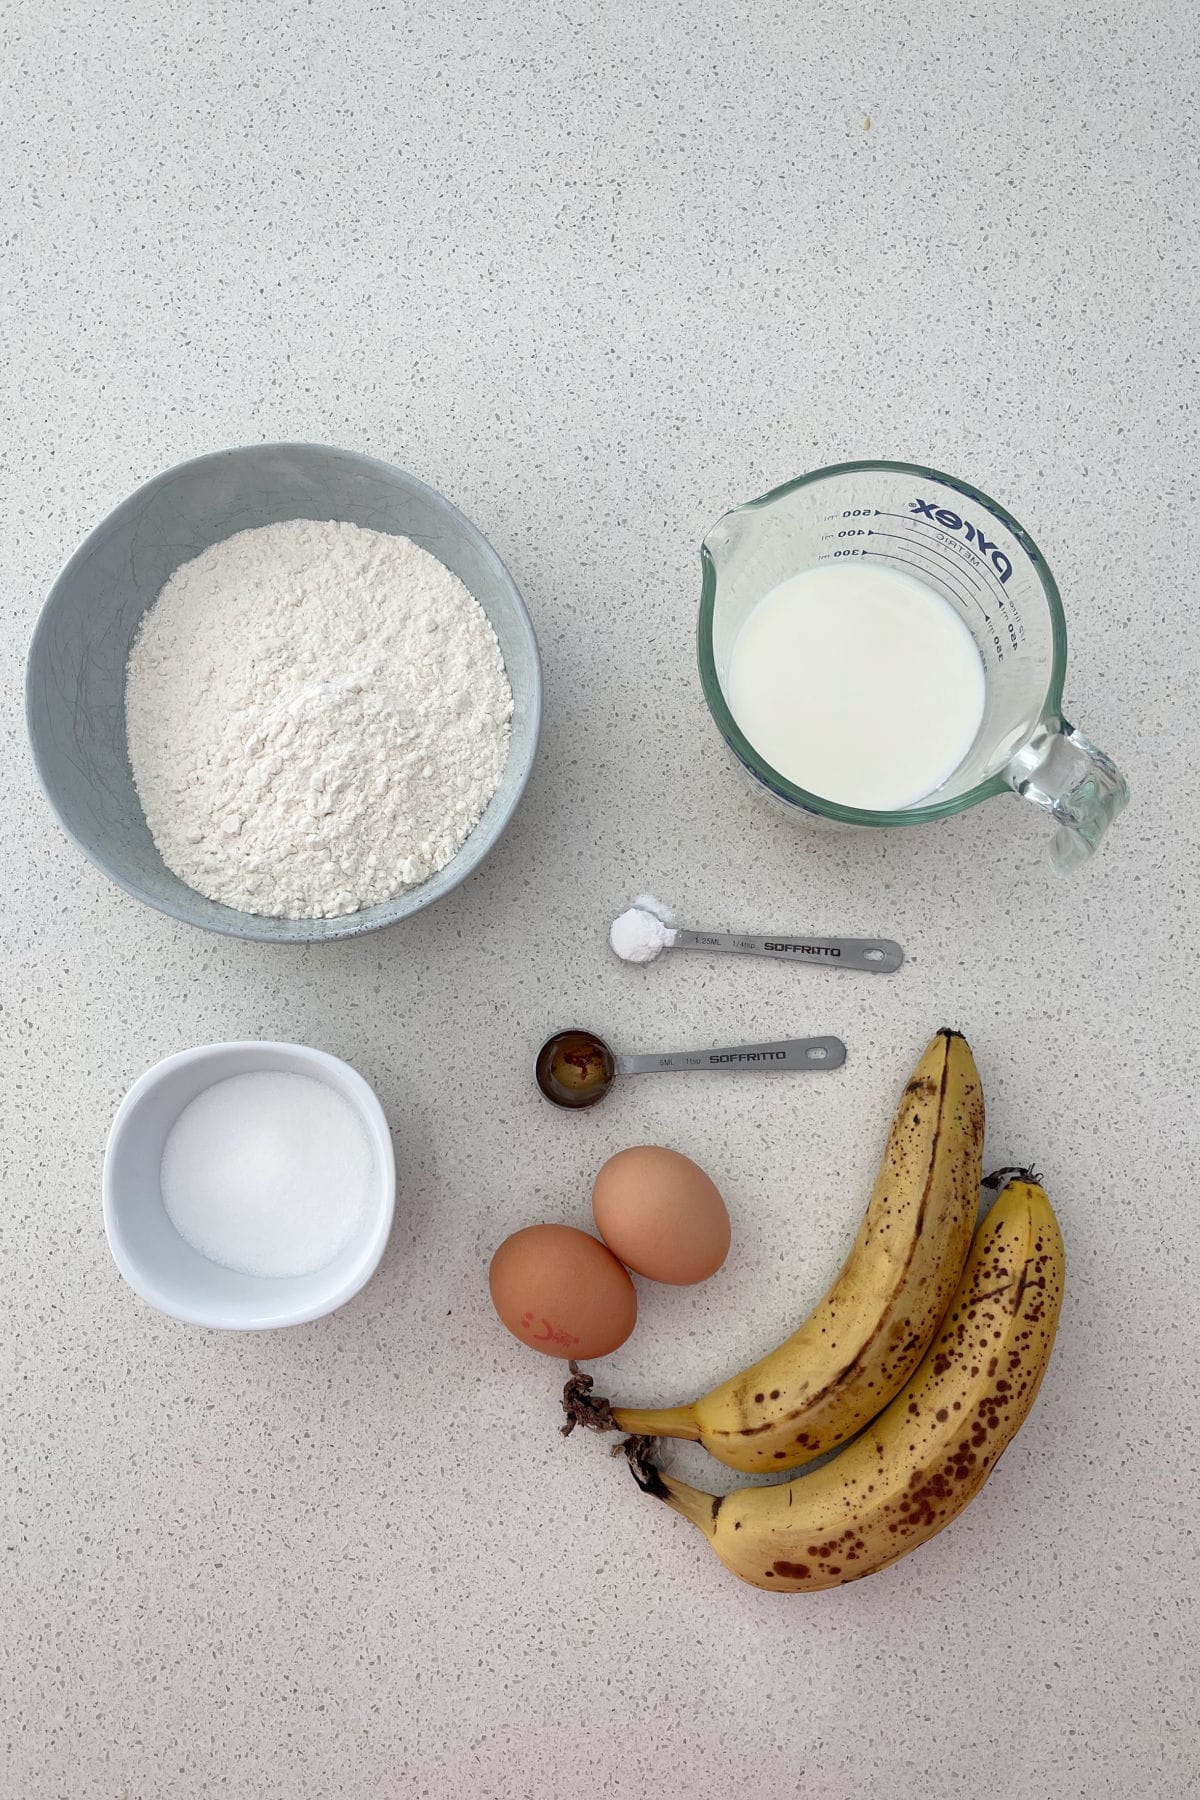 Ingredients to make banana spikelets on a bench top.